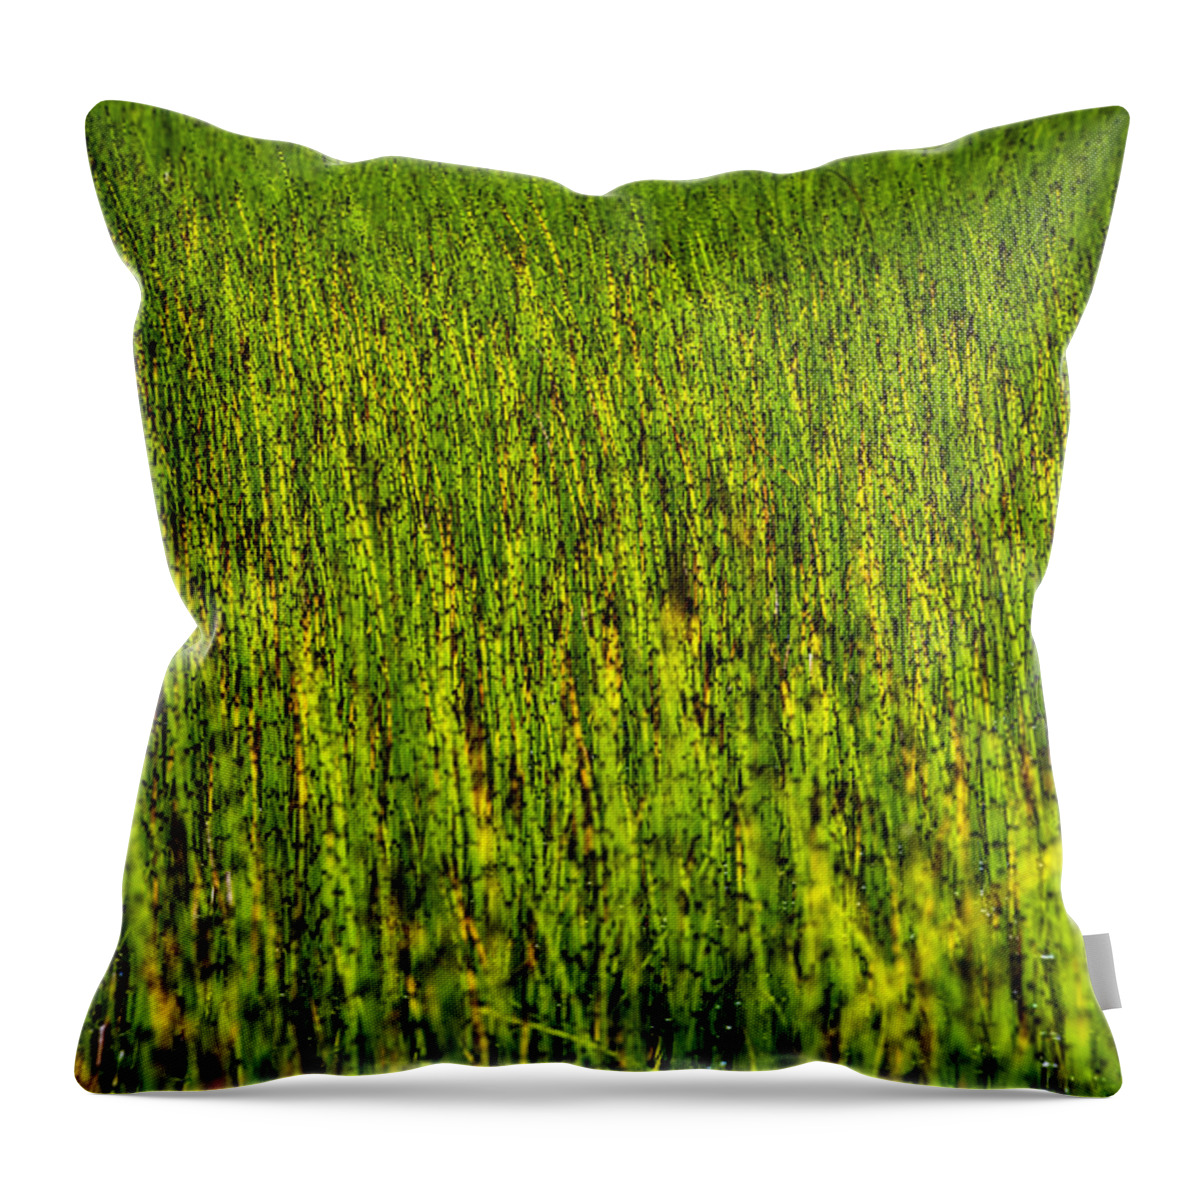 Blade Throw Pillow featuring the photograph Heather Lake Grass 2 by Pelo Blanco Photo